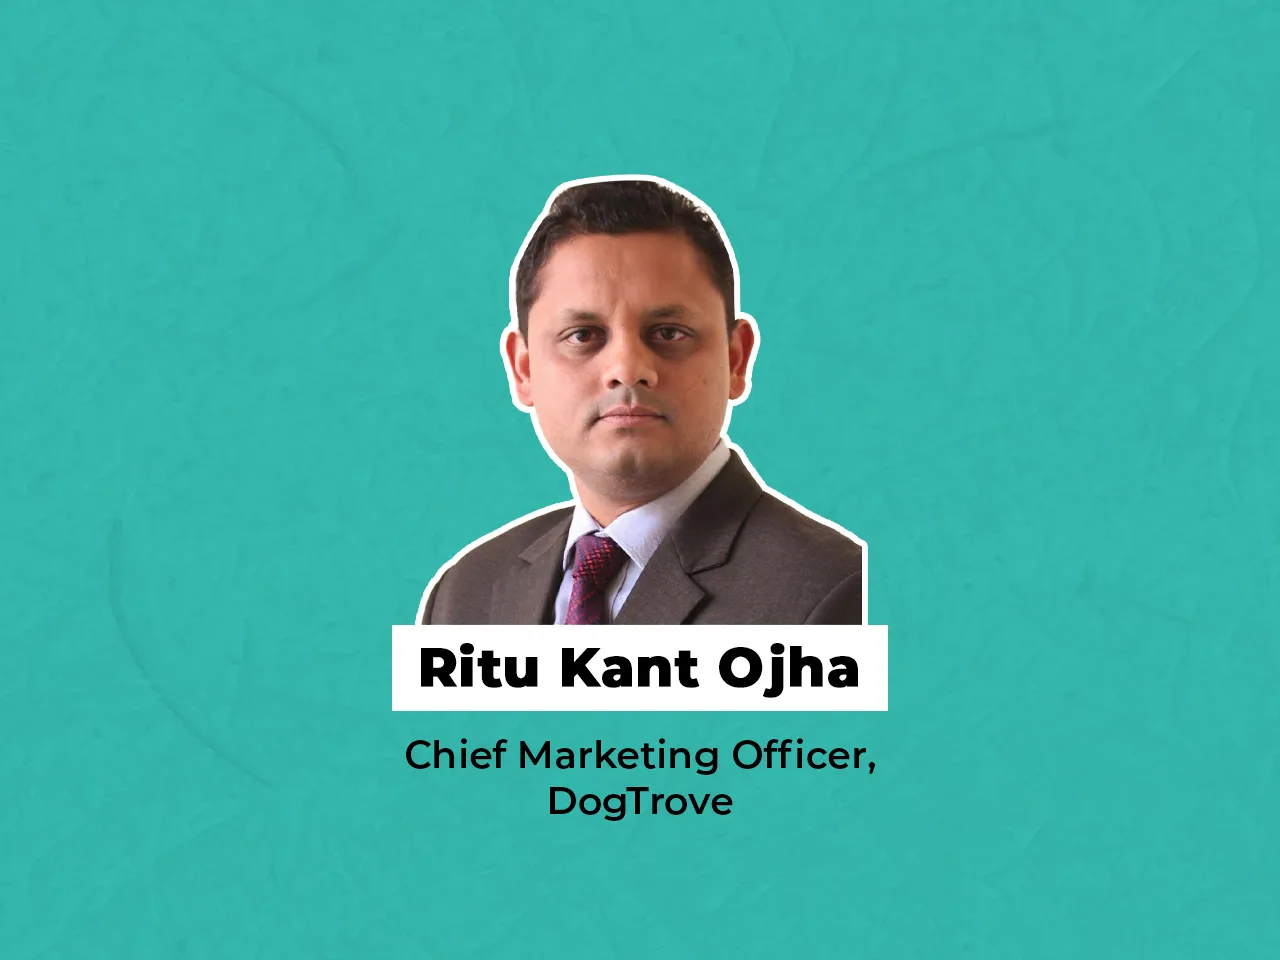 Ritu Kant Ojha appointed as Chief Marketing Officer at DogTrove